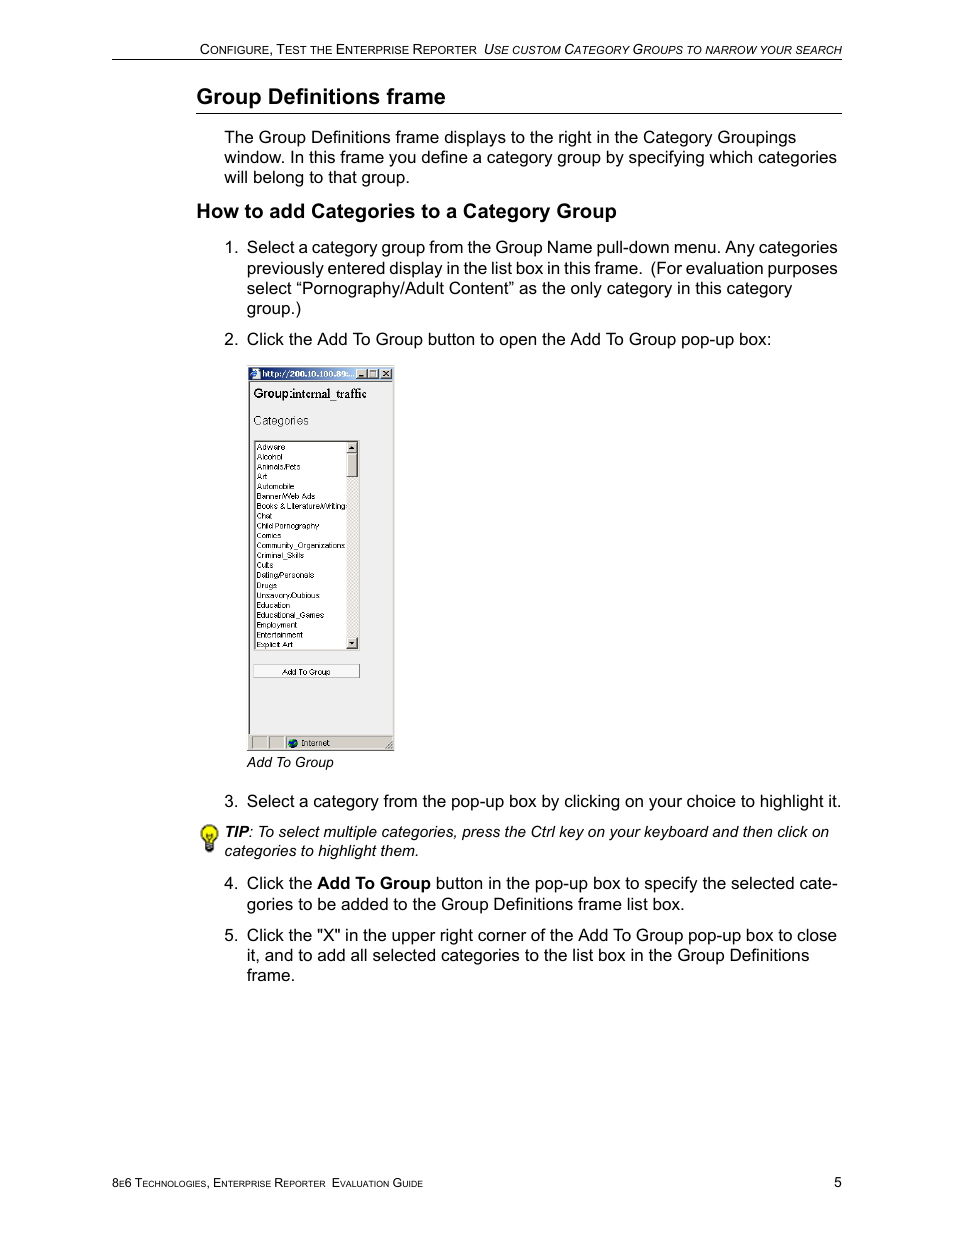 Group definitions frame, How to add categories to a category group | 8e6 Technologies Enterprise Reporter ER HL/SL User Manual | Page 9 / 48